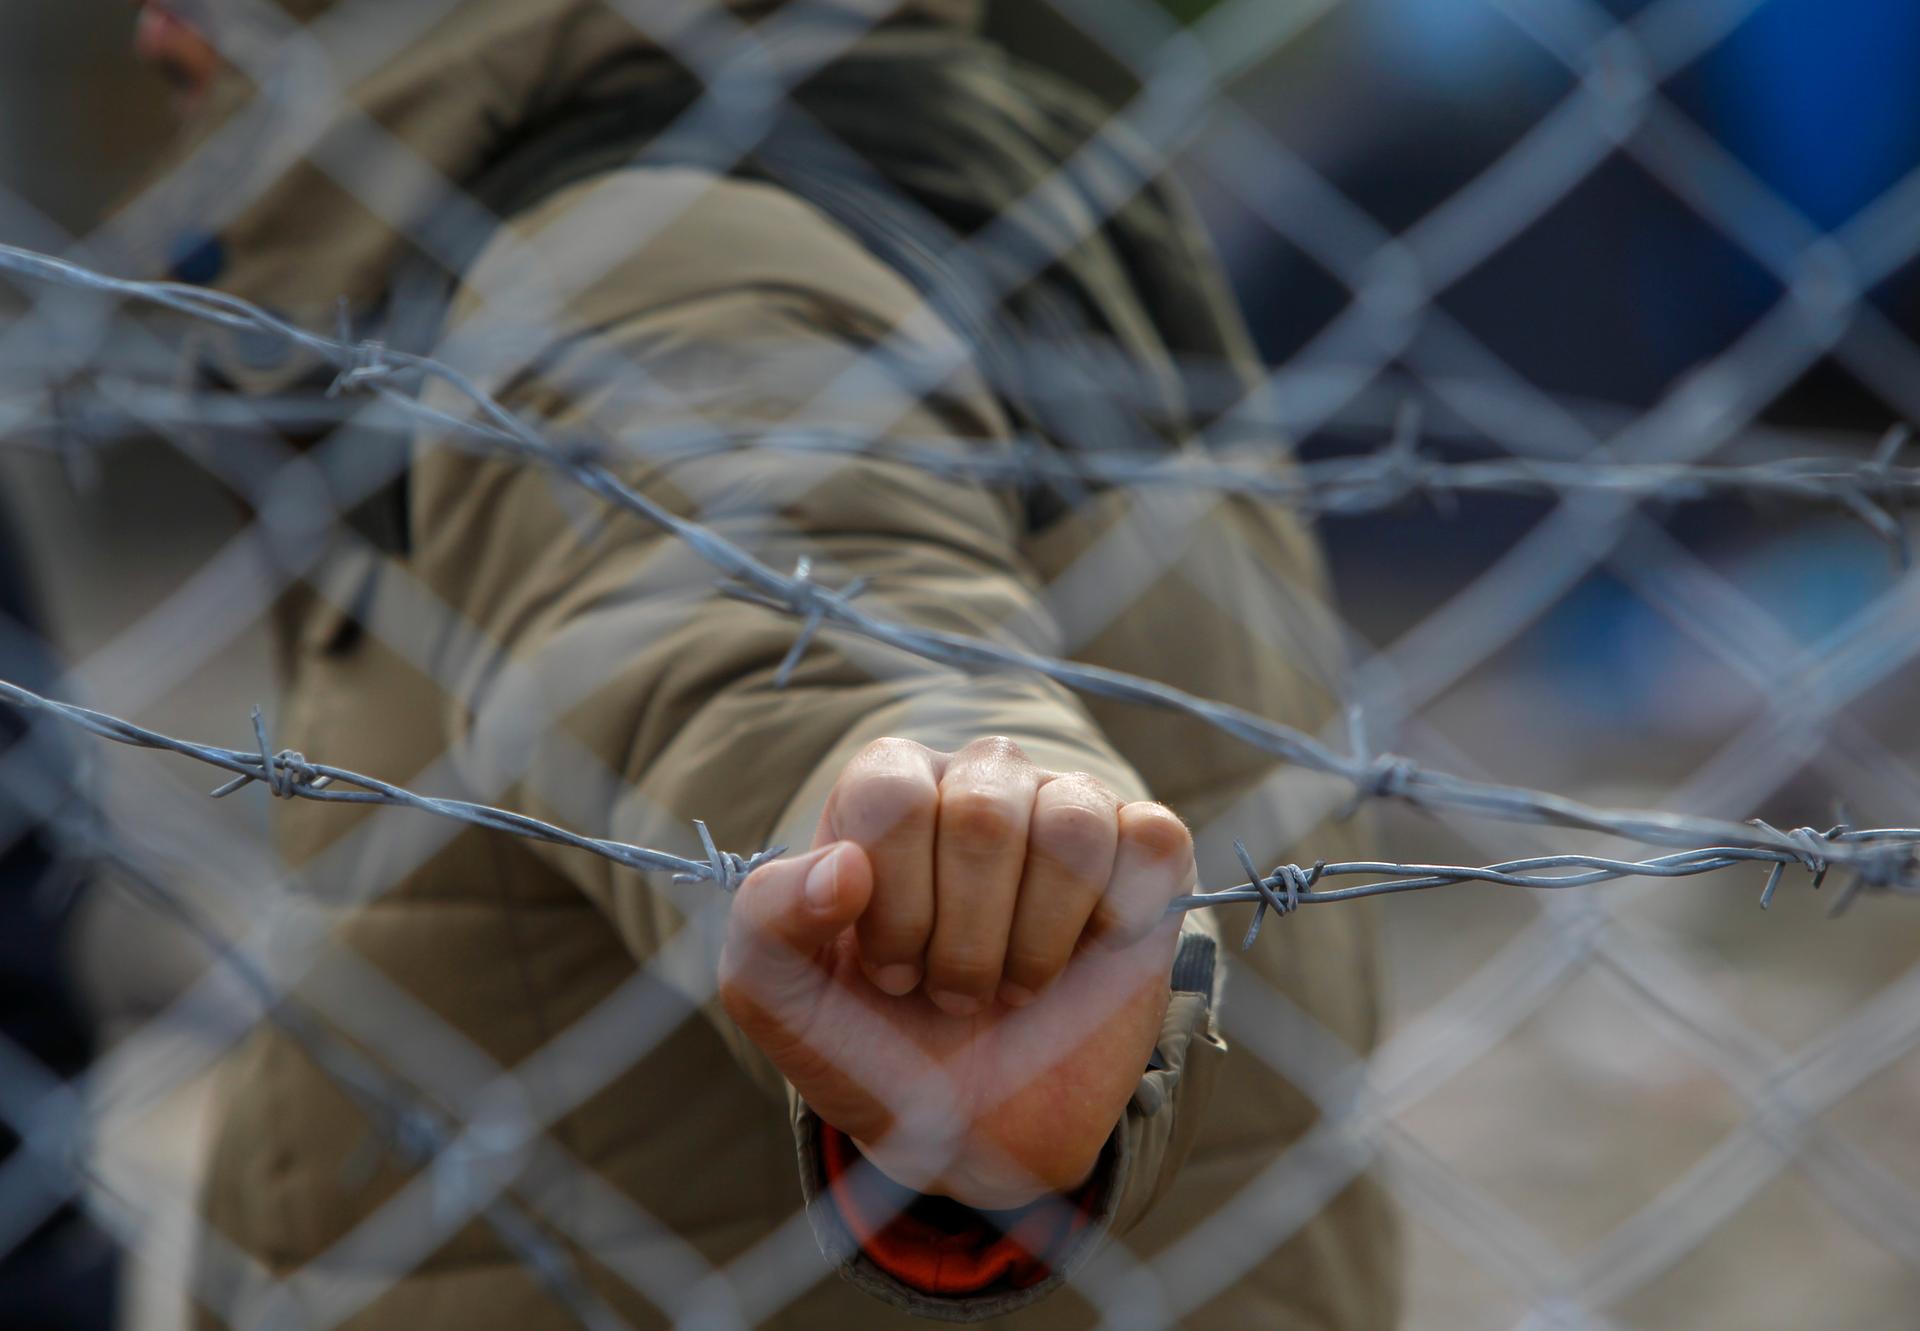 A migrant holds a barbed wire fence at the Macedonian-Greek border, near Gevgelija, Macedonia, November 29, 2015.